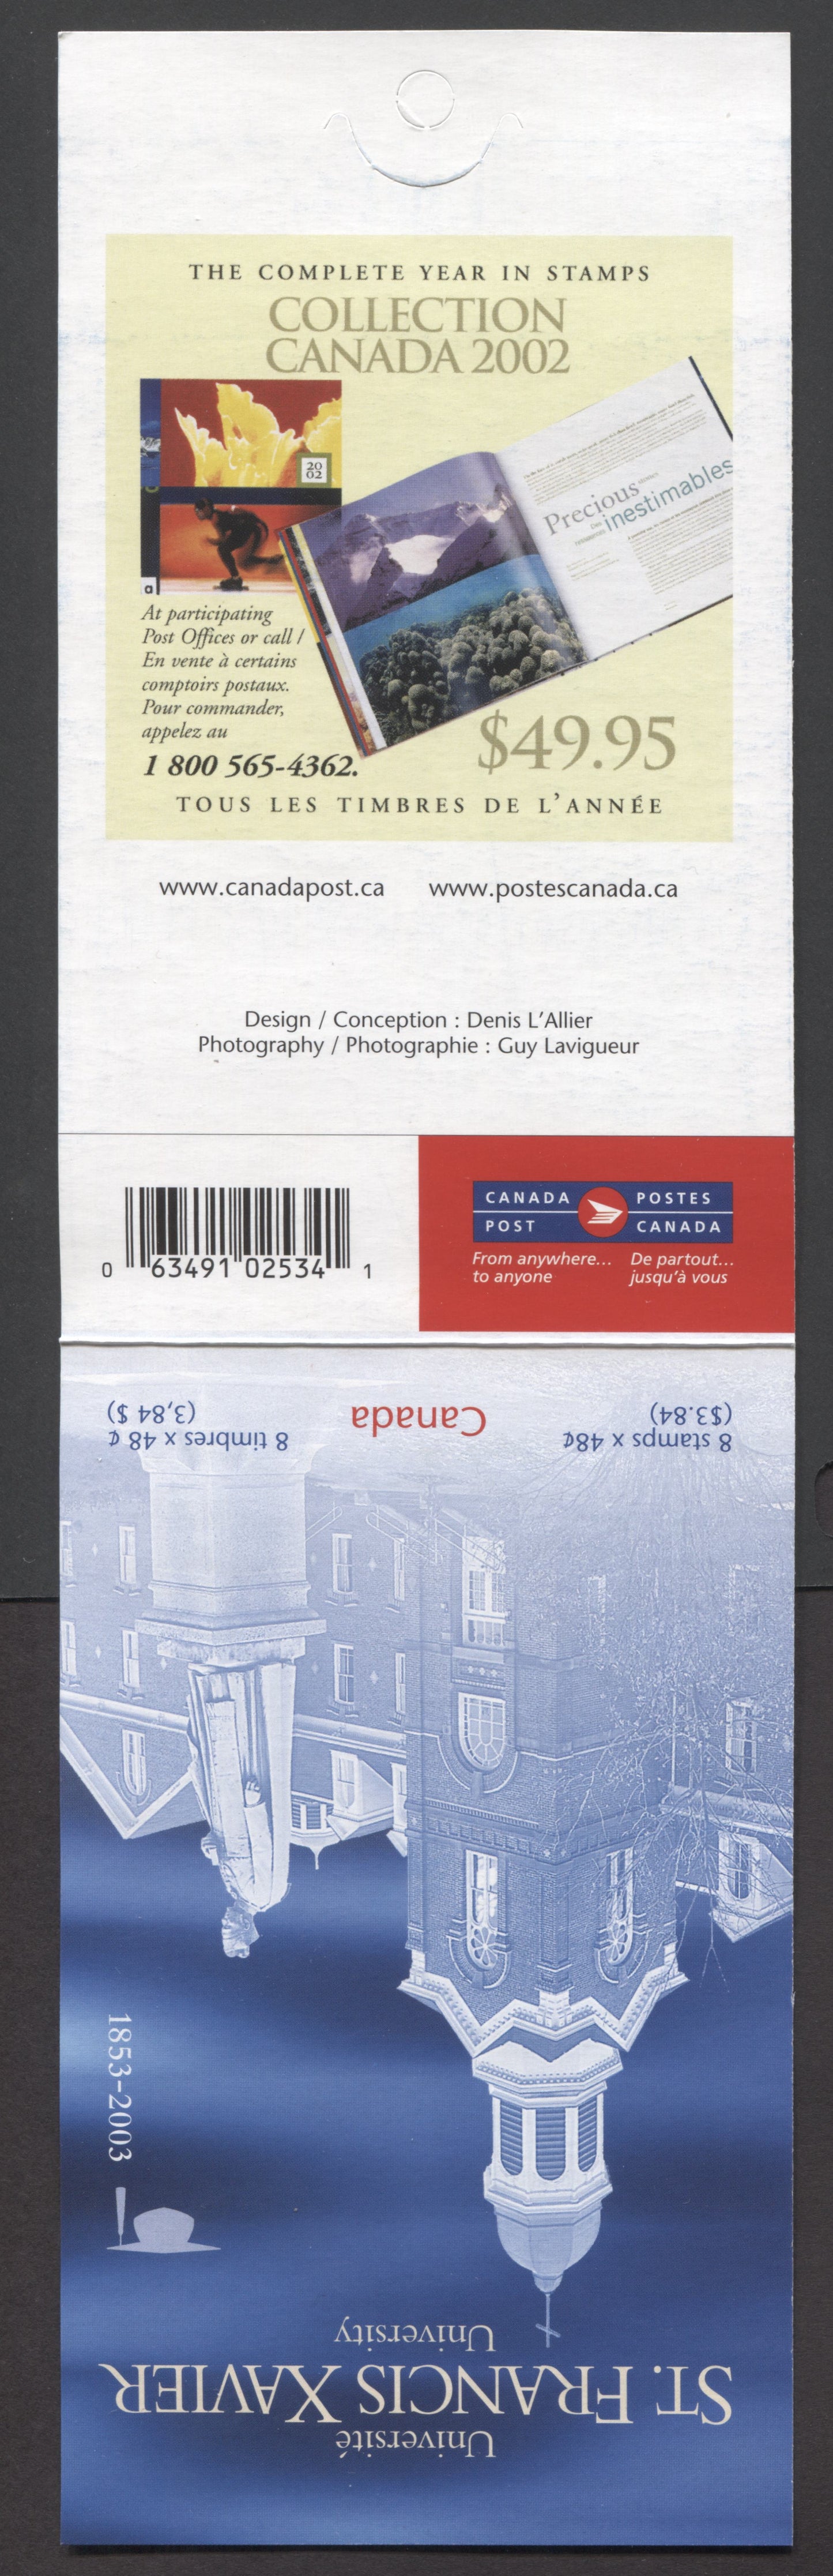 Canada #BK269a-b 2003 St. Francis Xavier University Issue, Complete $3.84 Booklet, Tullis Russell Coatings Paper, Dead Paper, 4 mm GT-4 Tagging